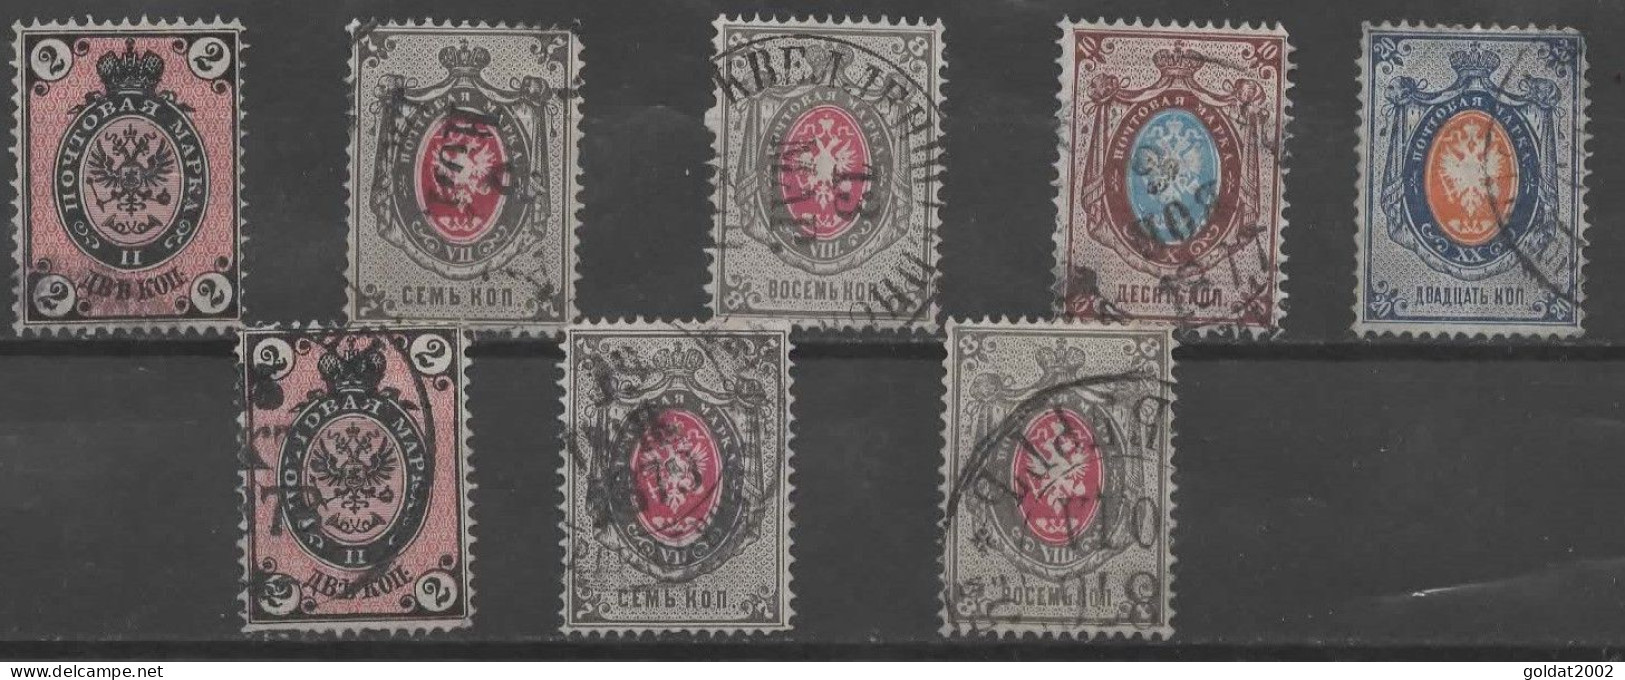 Imperial Russia 1875,Sc # 26-30+Sc #26a,27b,28a,Horiz.+Vertic.laid Paper,Used . - Usados